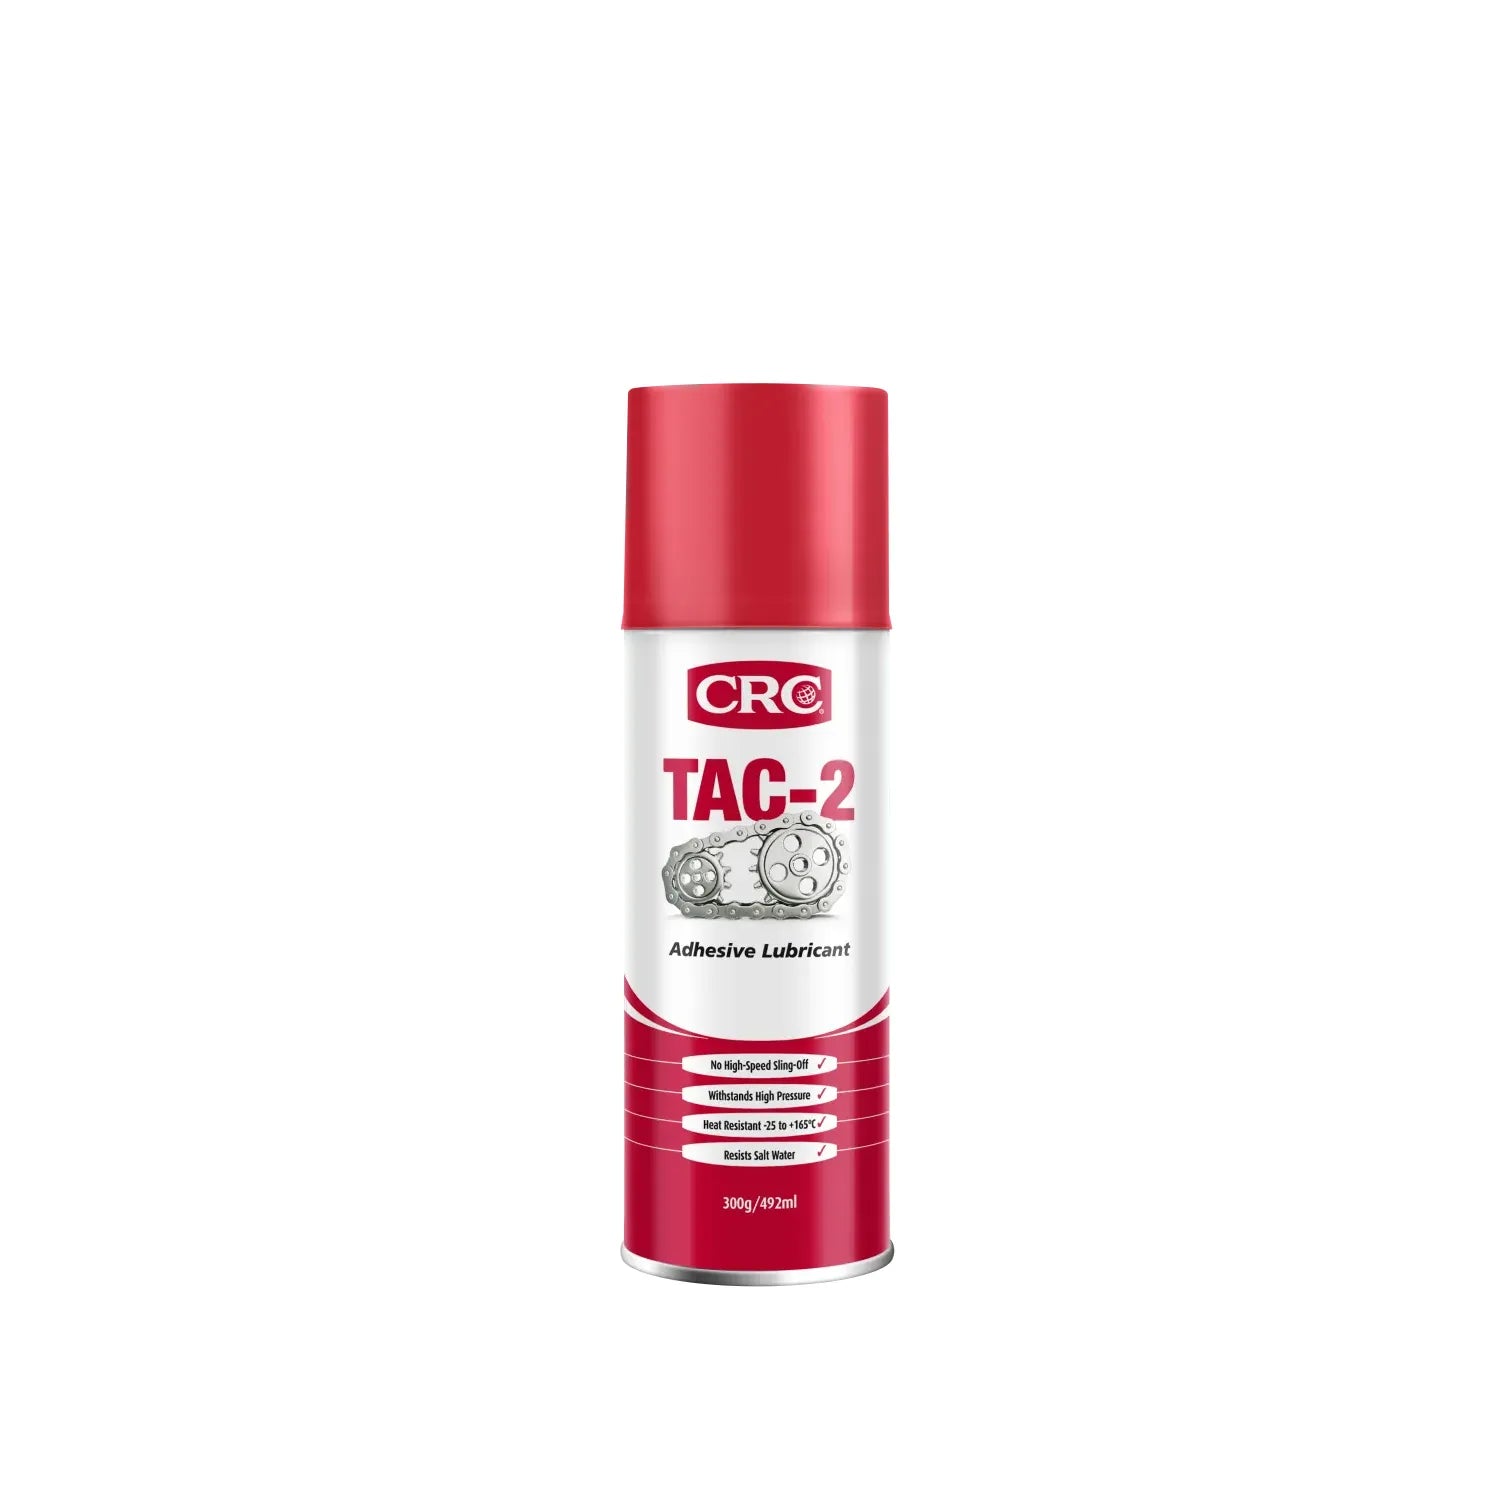 CRC TAC2 Adhesive Lubricant 300g | Product Code : 5035 - South East Clearance Centre